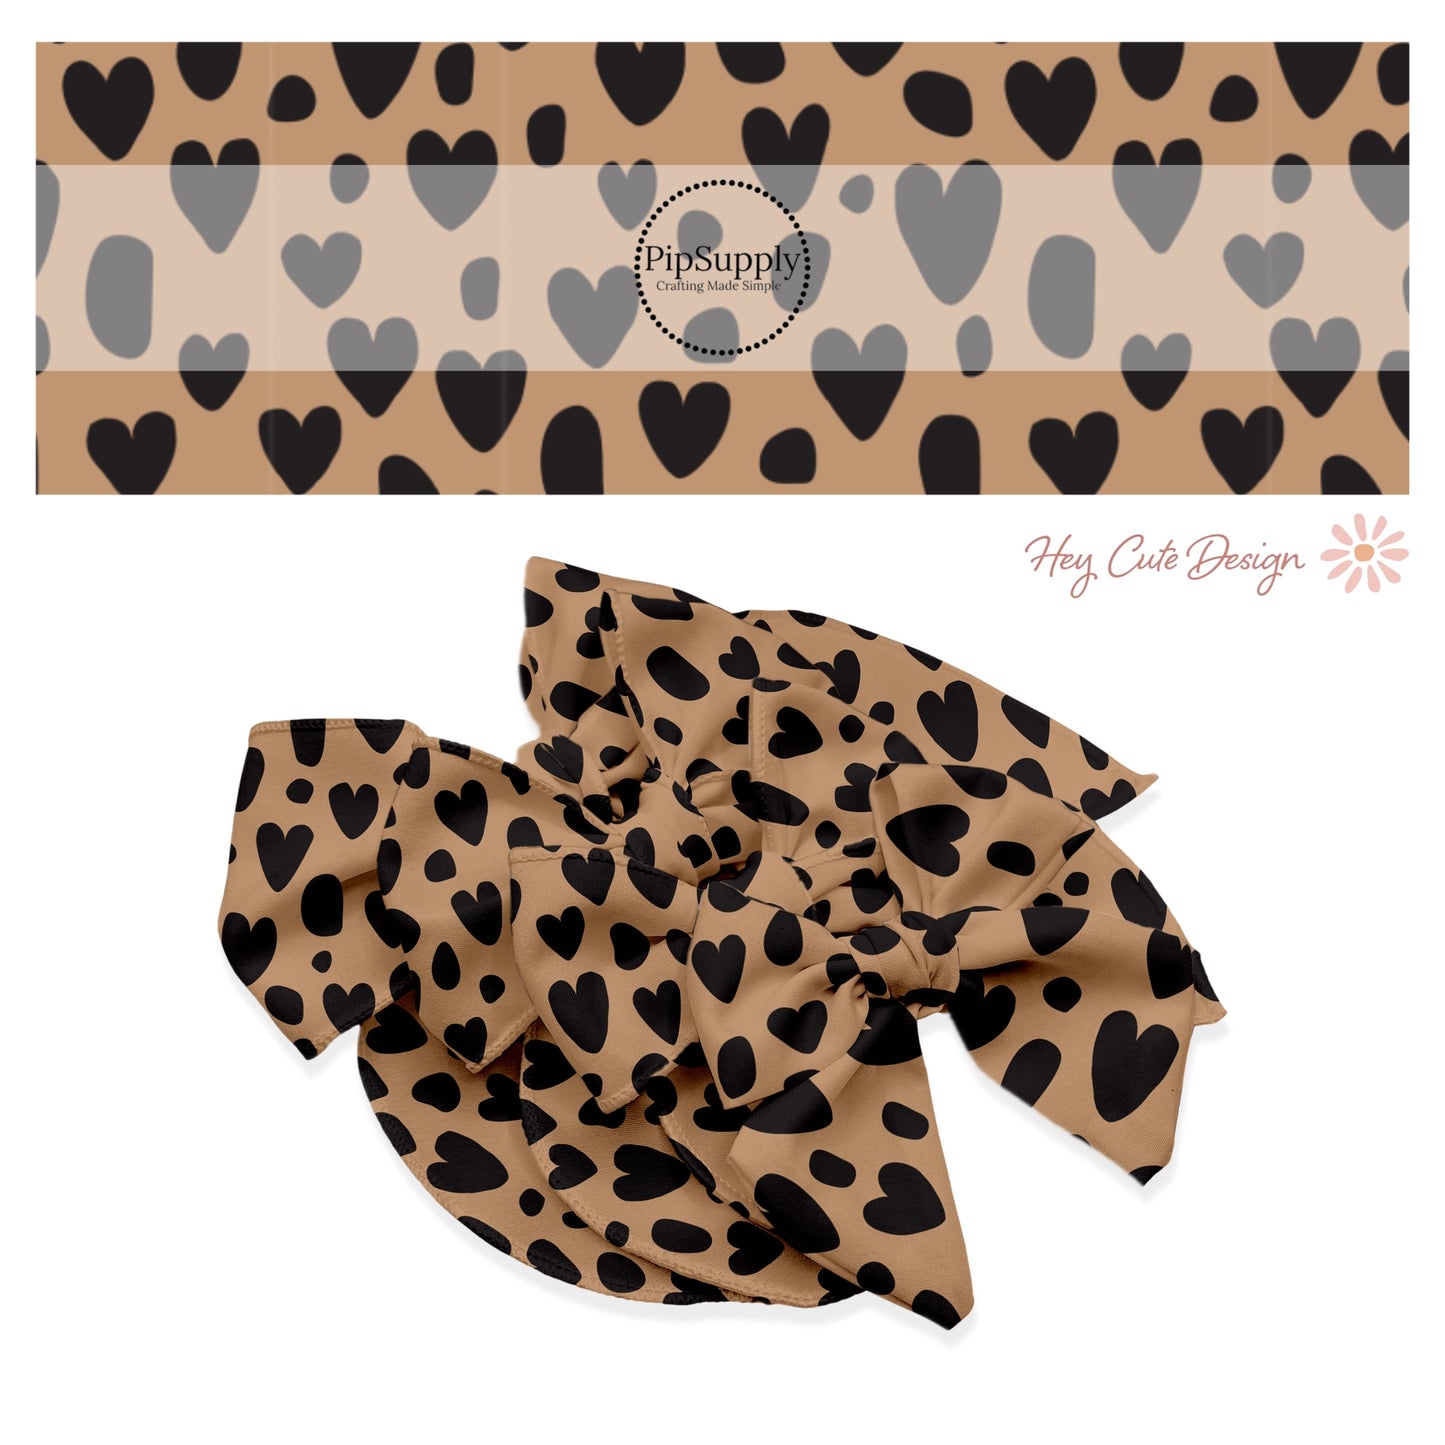 These heart and spot themed brown no sew bow strips can be easily tied and attached to a clip for a finished hair bow. These fun animal themed bow strips with leopard pattern with hearts and spots in black on brown are great for personal use or to sell.